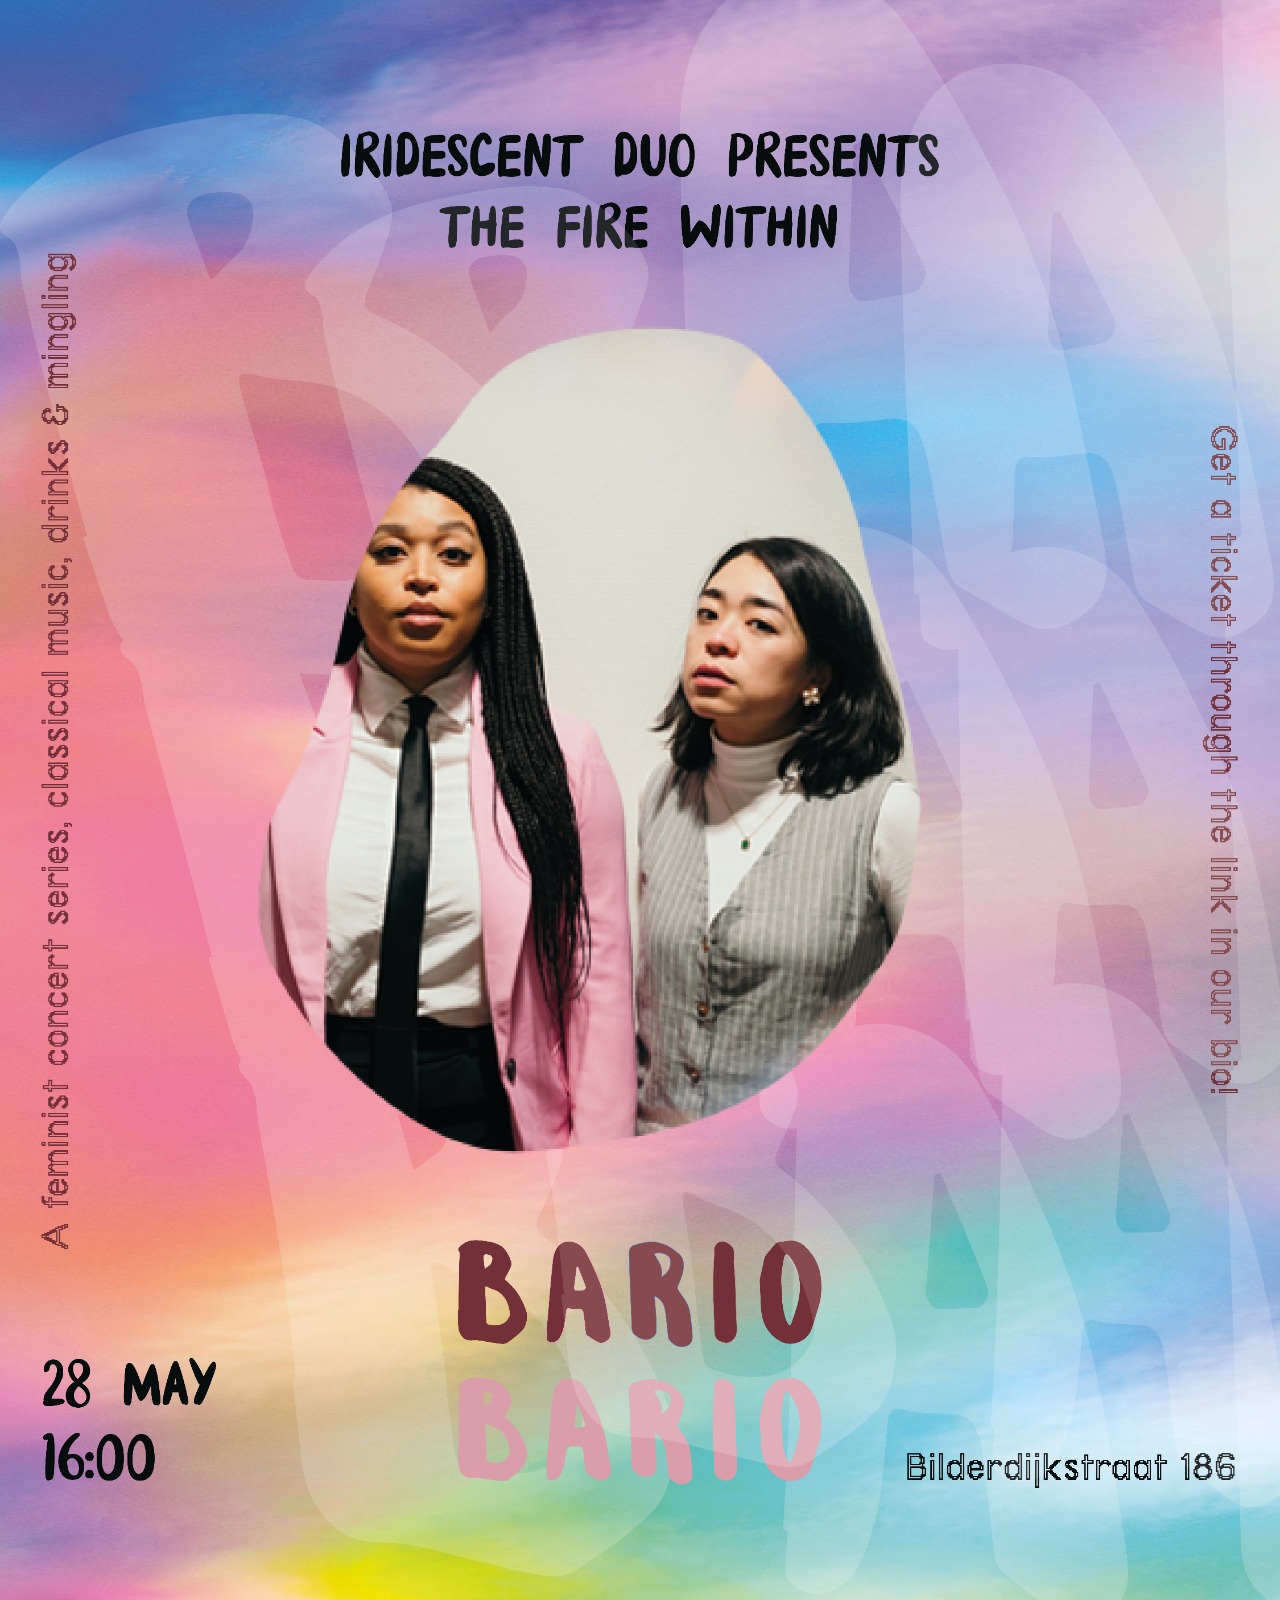 Iridescent Duo Presents The Fire Within